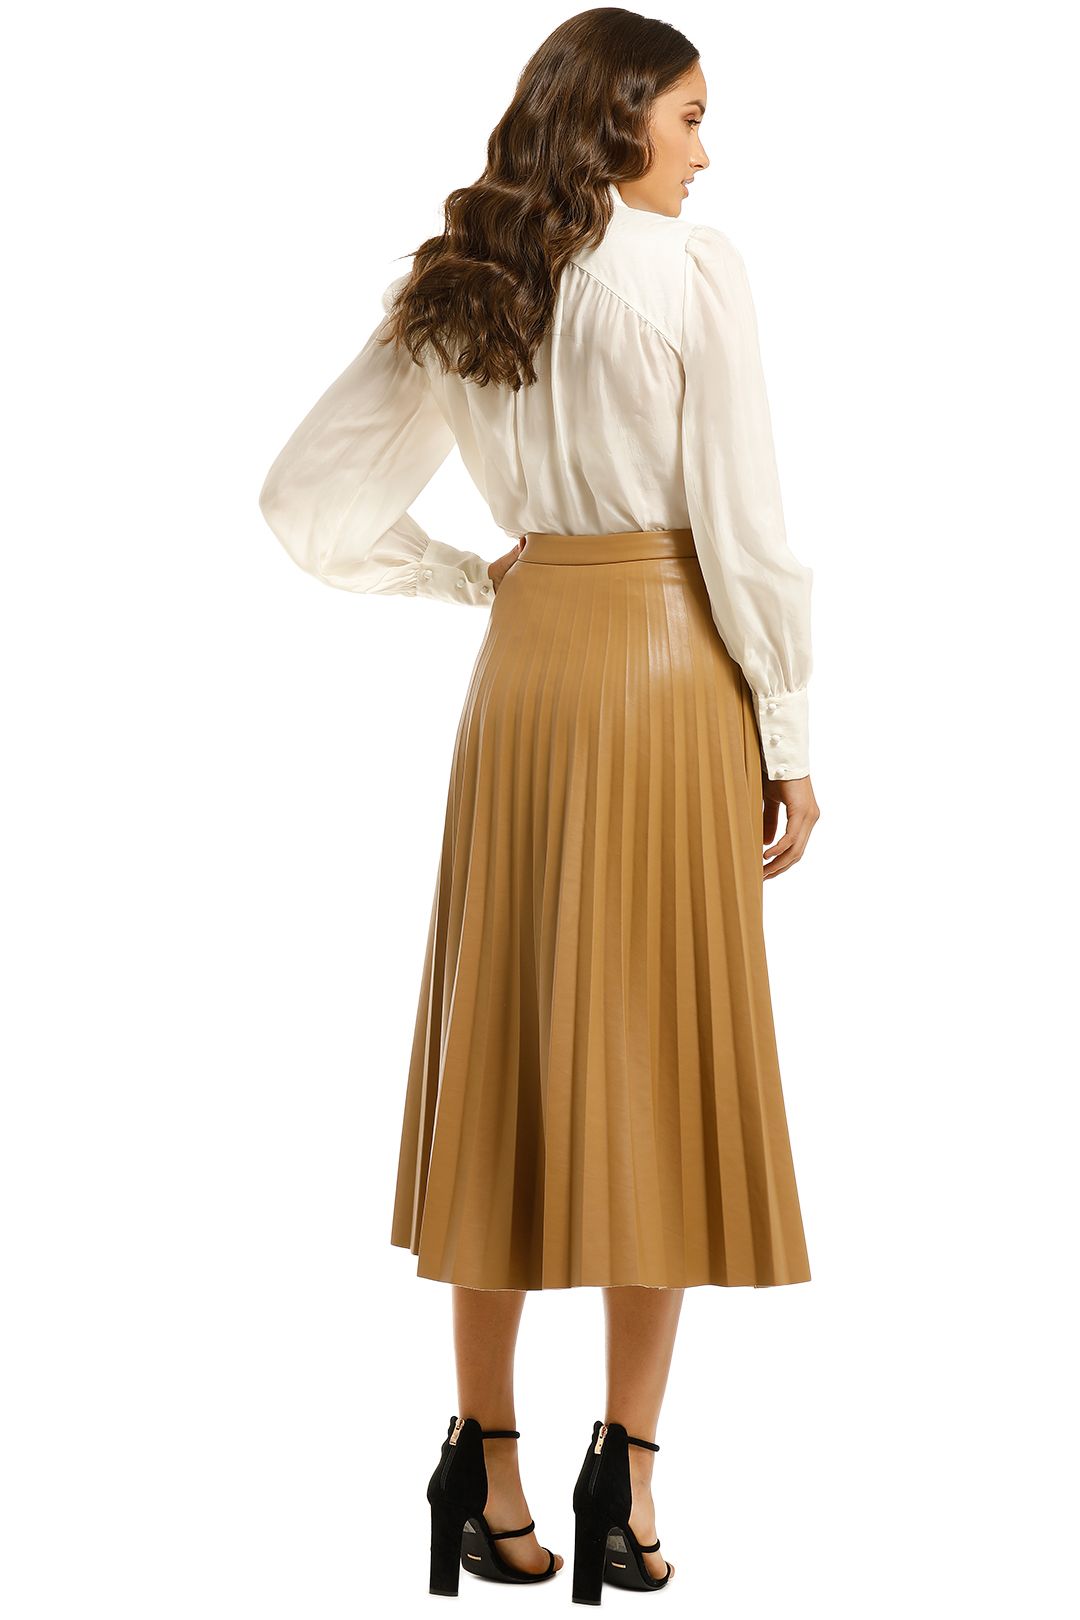 Pleated Faux Leather Skirt in Camel by 